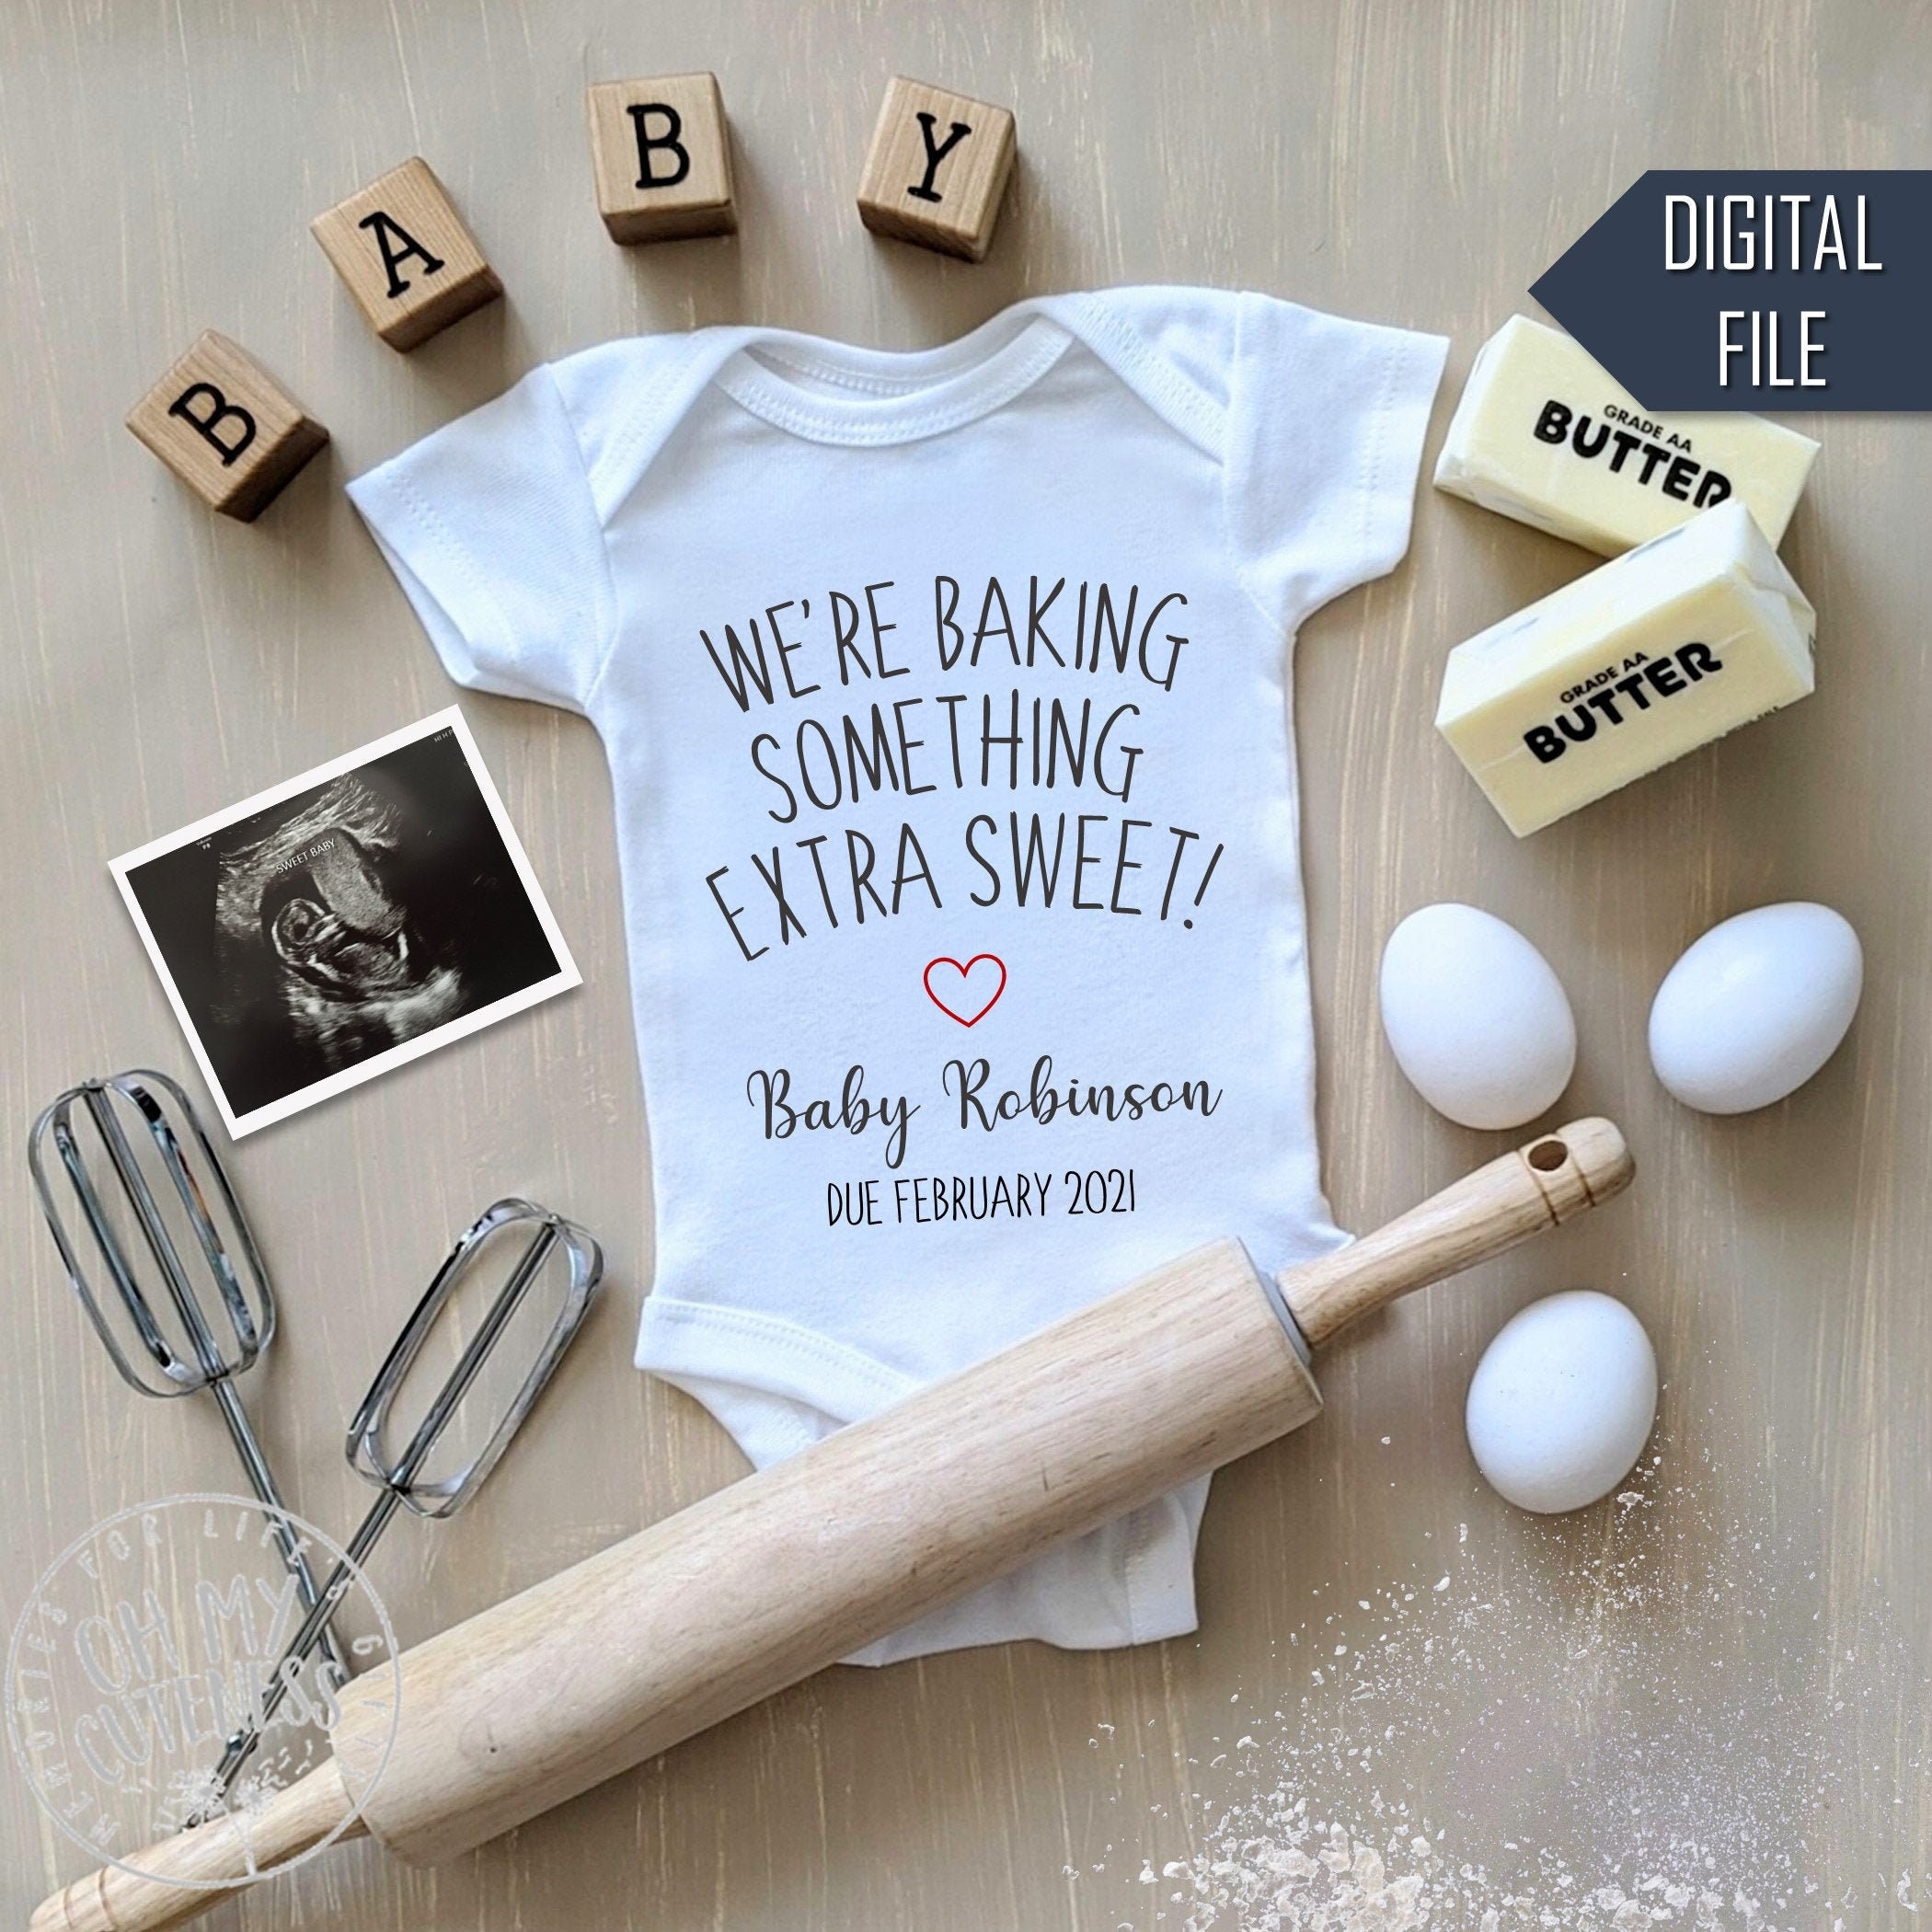 Personalized Social Media Pregnancy Announcement Idea It s A Girl We re Having A Girl Baking 